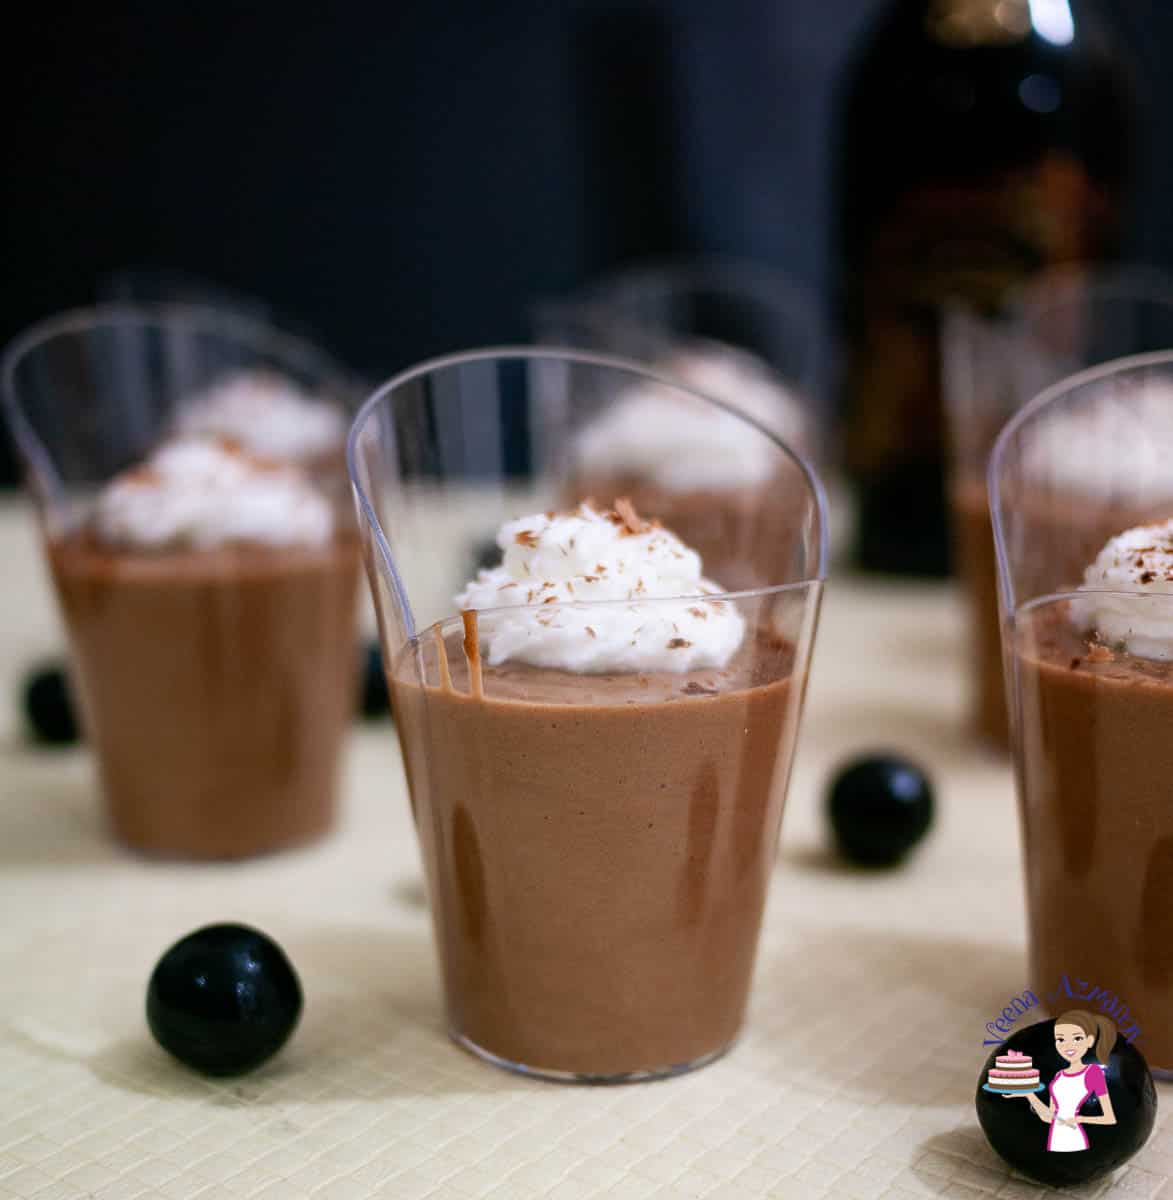 A glass with chocolate mousse